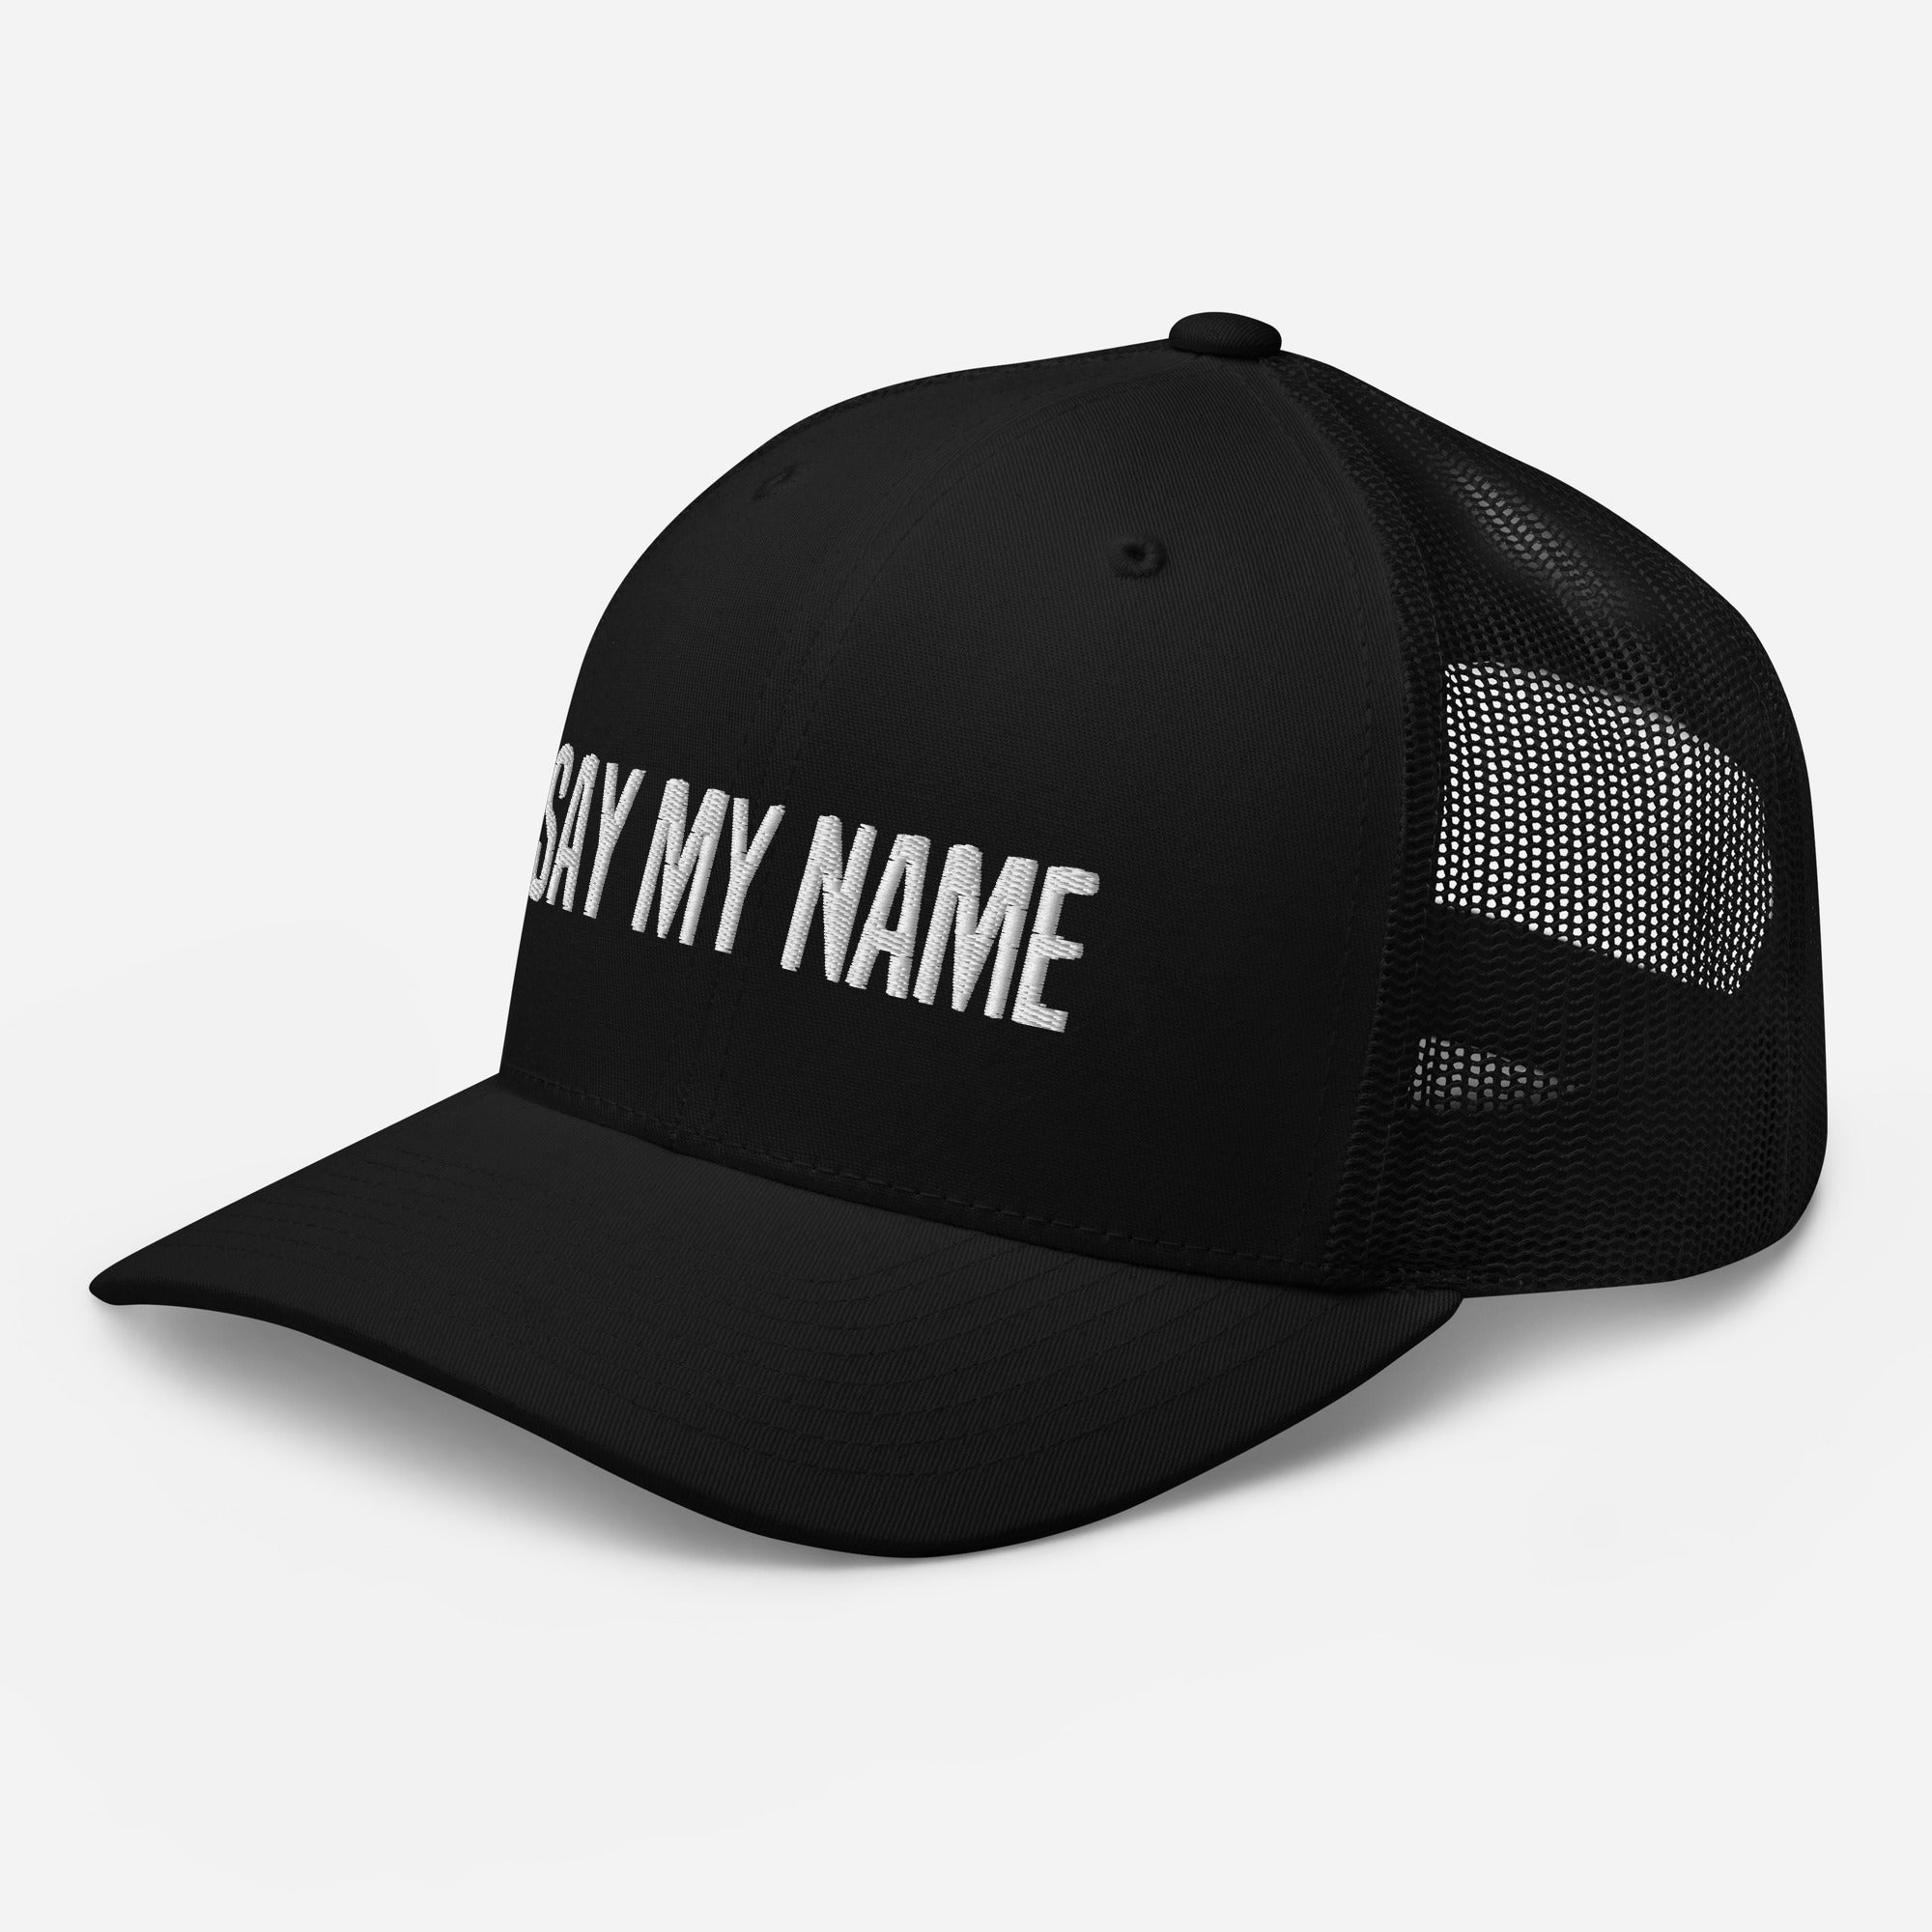 Casquette Trucker "SAY MY NAME" brodé